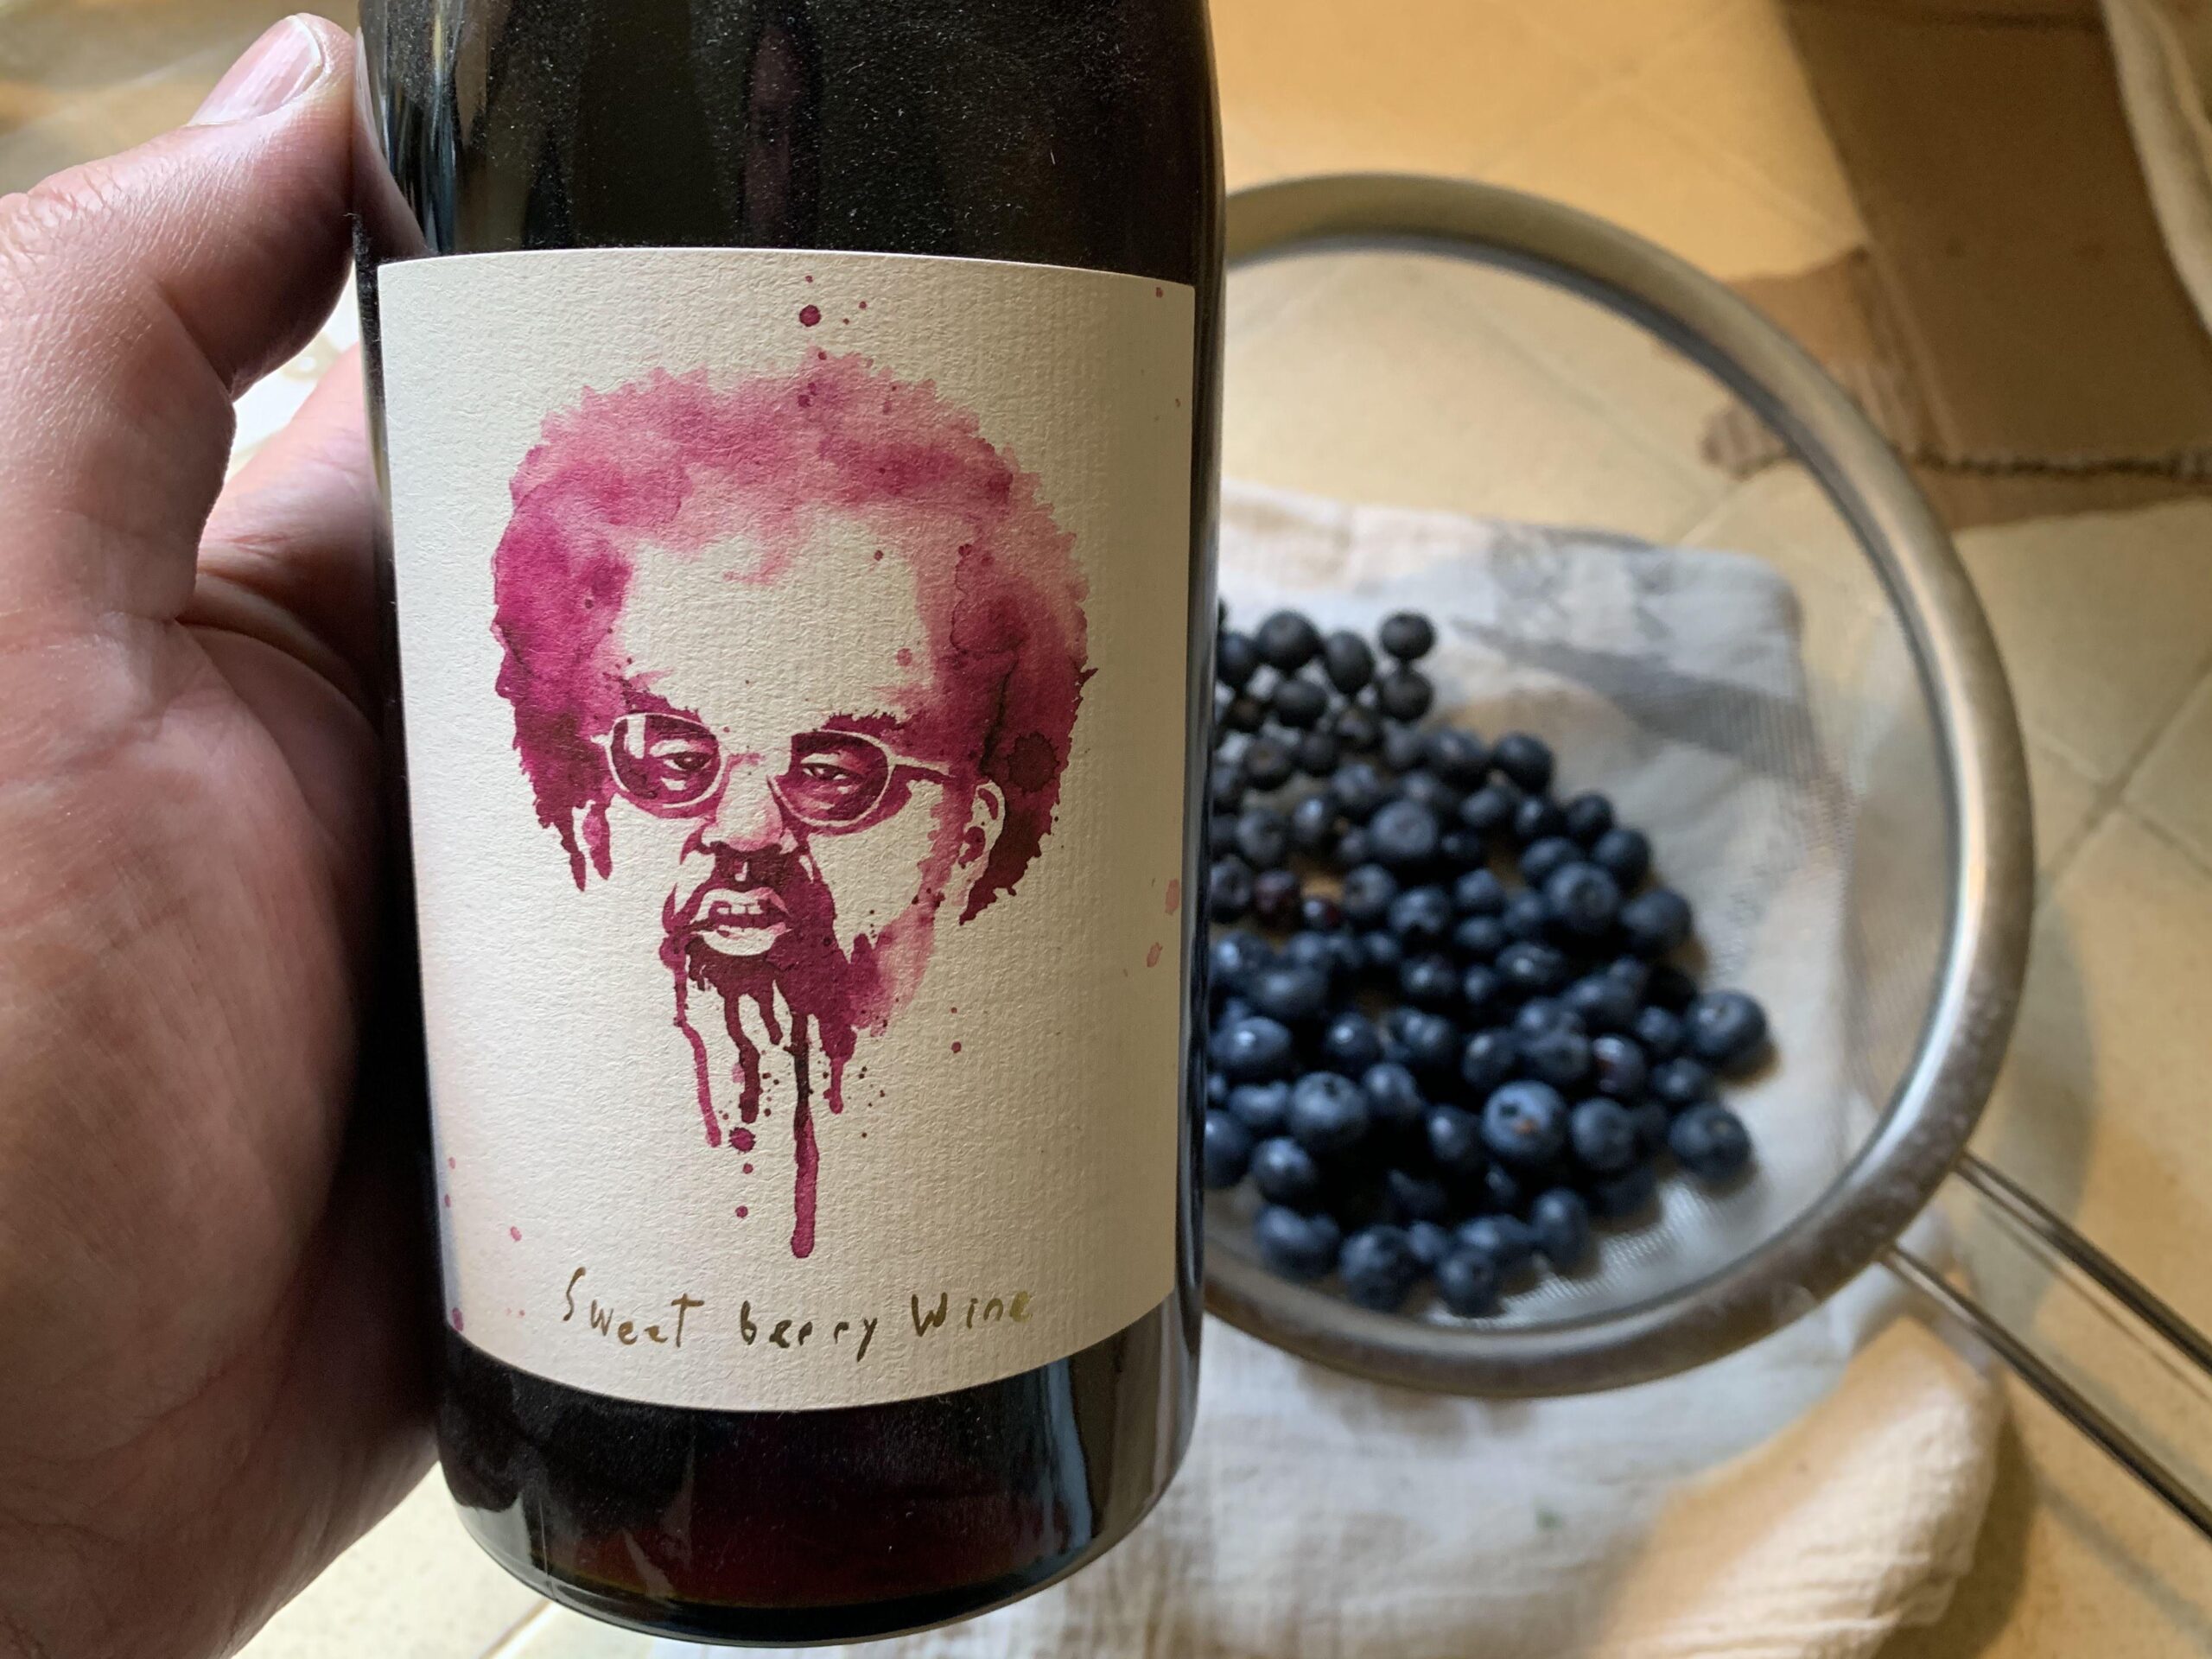 We cannot be more excited that sweet berry wine is now a real wine!